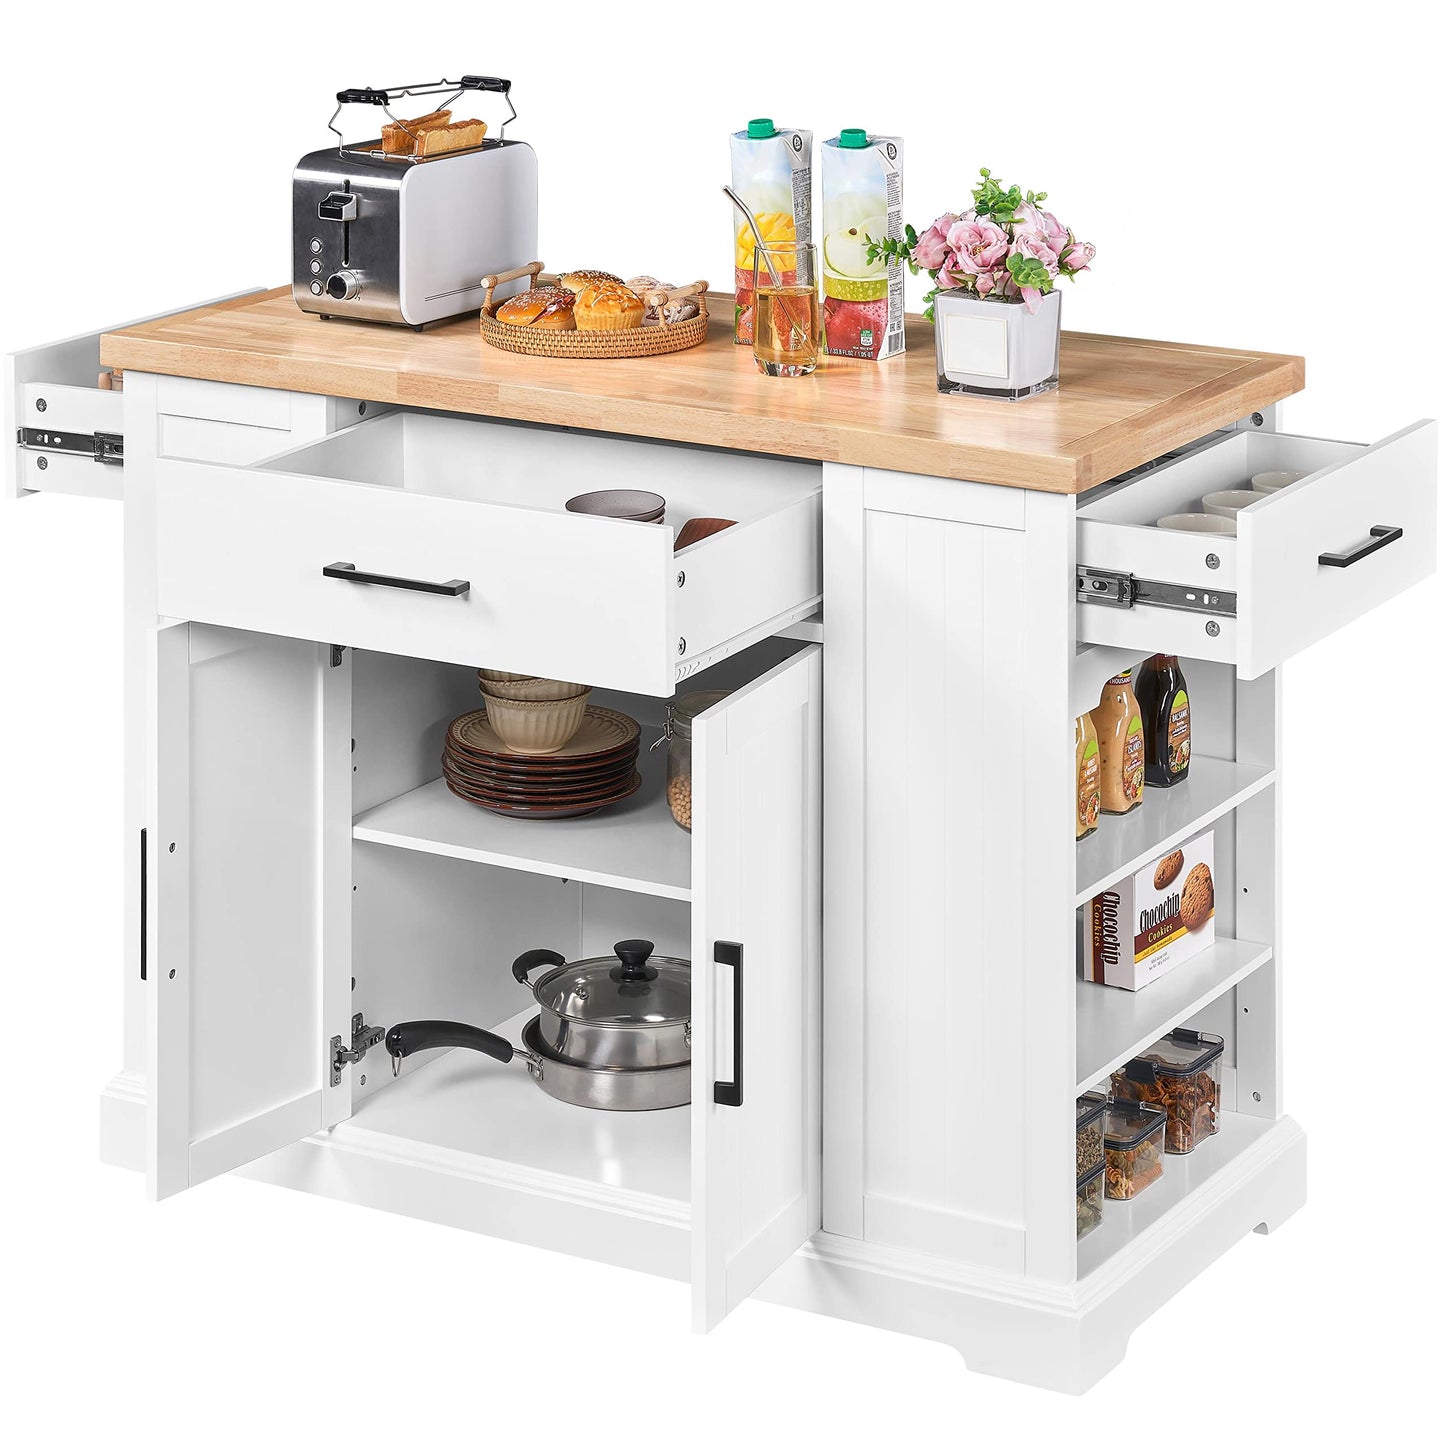 Yaheetech Rolling Kitchen Island Cart with 3 Drawers, Kitchen Storage Cabinet on Wheels with Open Shelves and Inner Adjustable Shelves for Dining Room/Living Room, Thicker Rubberwood Top, White